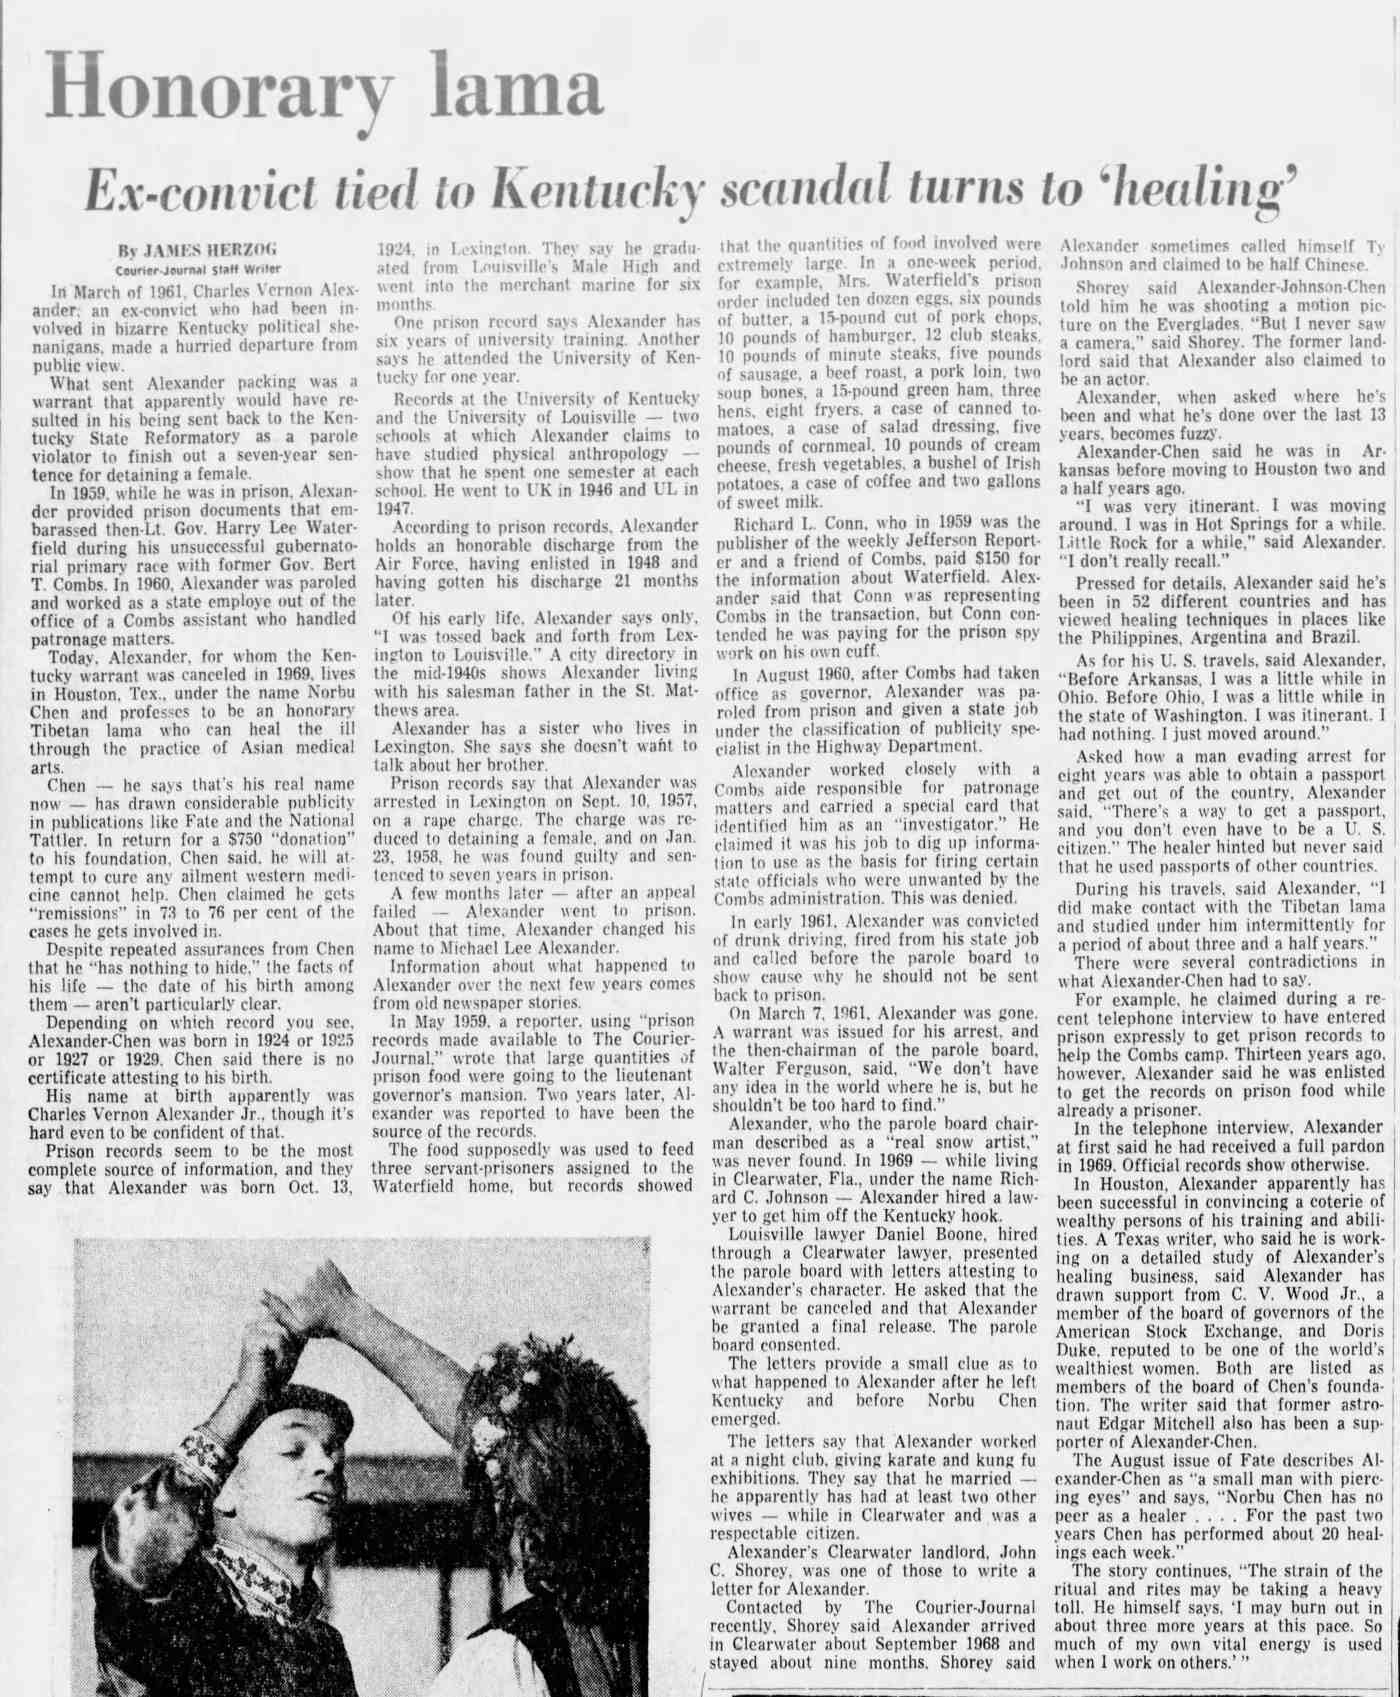 Courier-Journal October 28, 1974. Honorary Lama: Ex-con tied to Kentucky scandal turns to healing